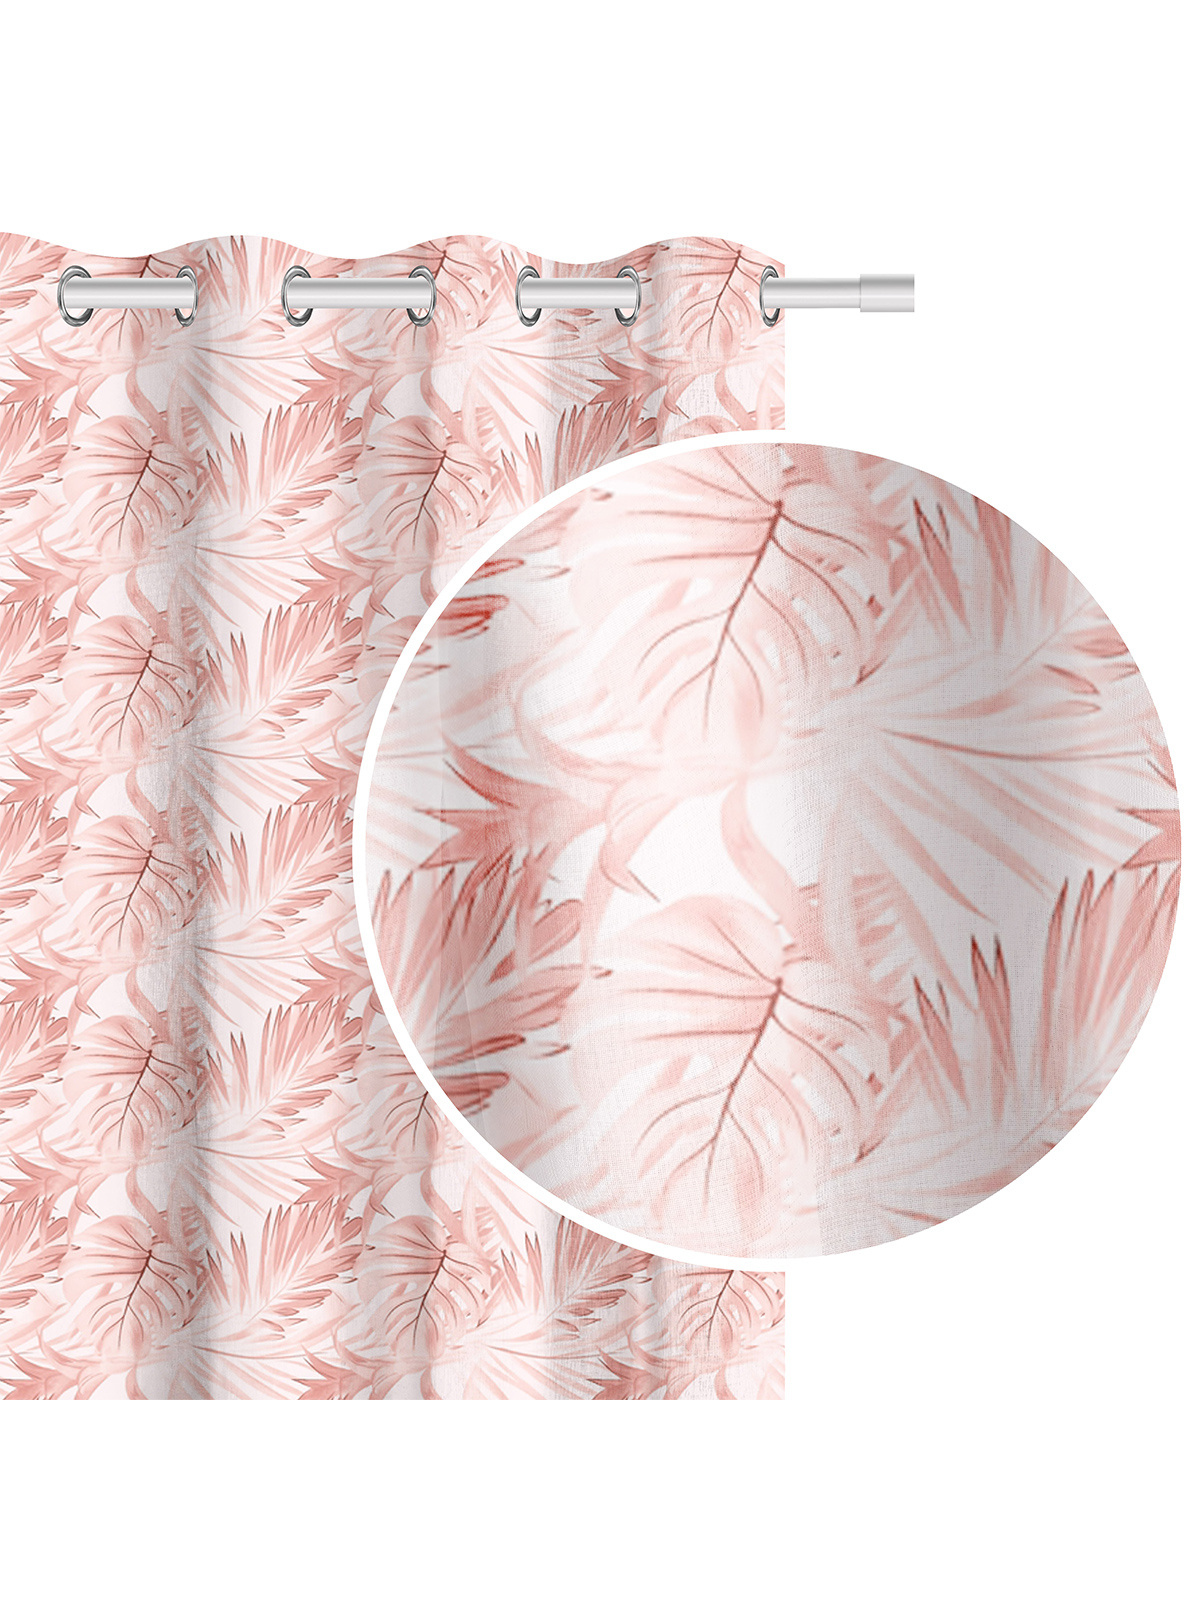 Edoti Curtain With Leaves Hibiscus 140x250 A738